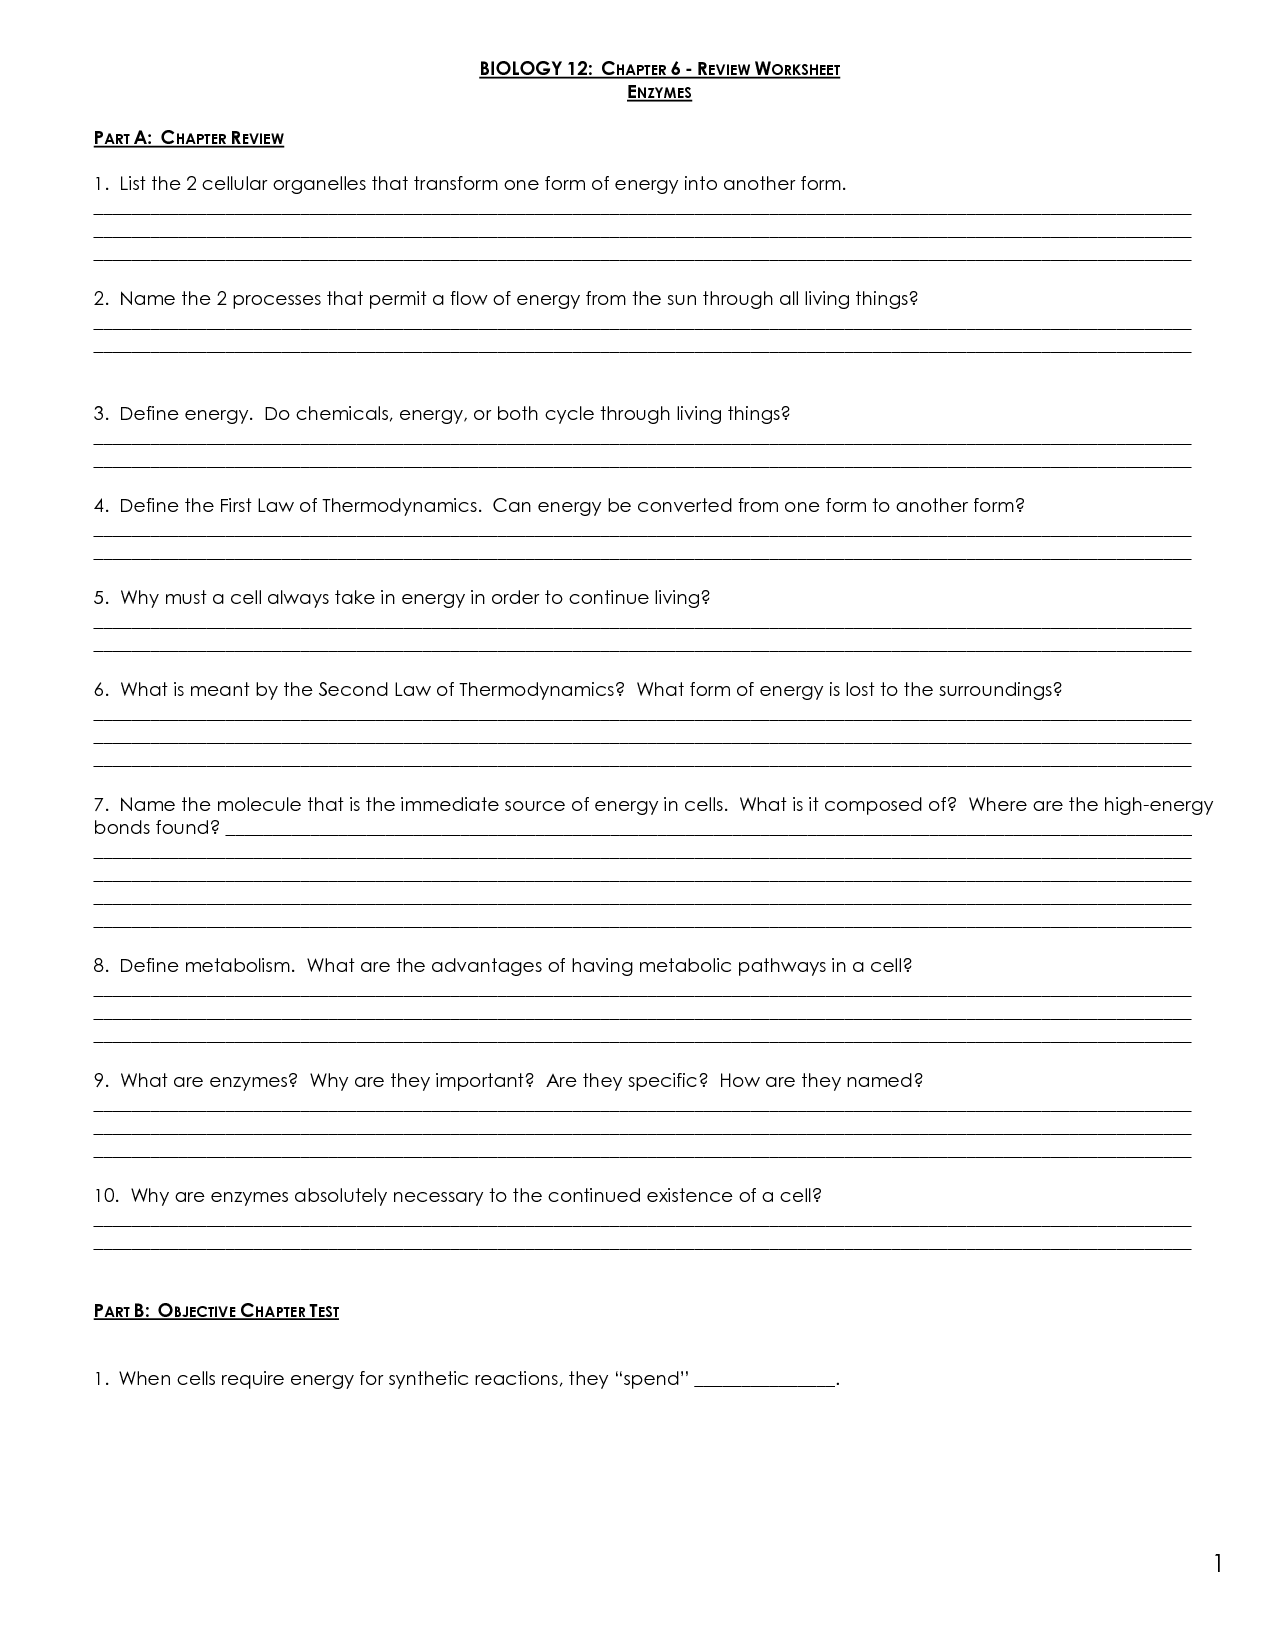 13-best-images-of-enzyme-practice-worksheet-answers-virtual-lab-enzyme-controlled-reactions